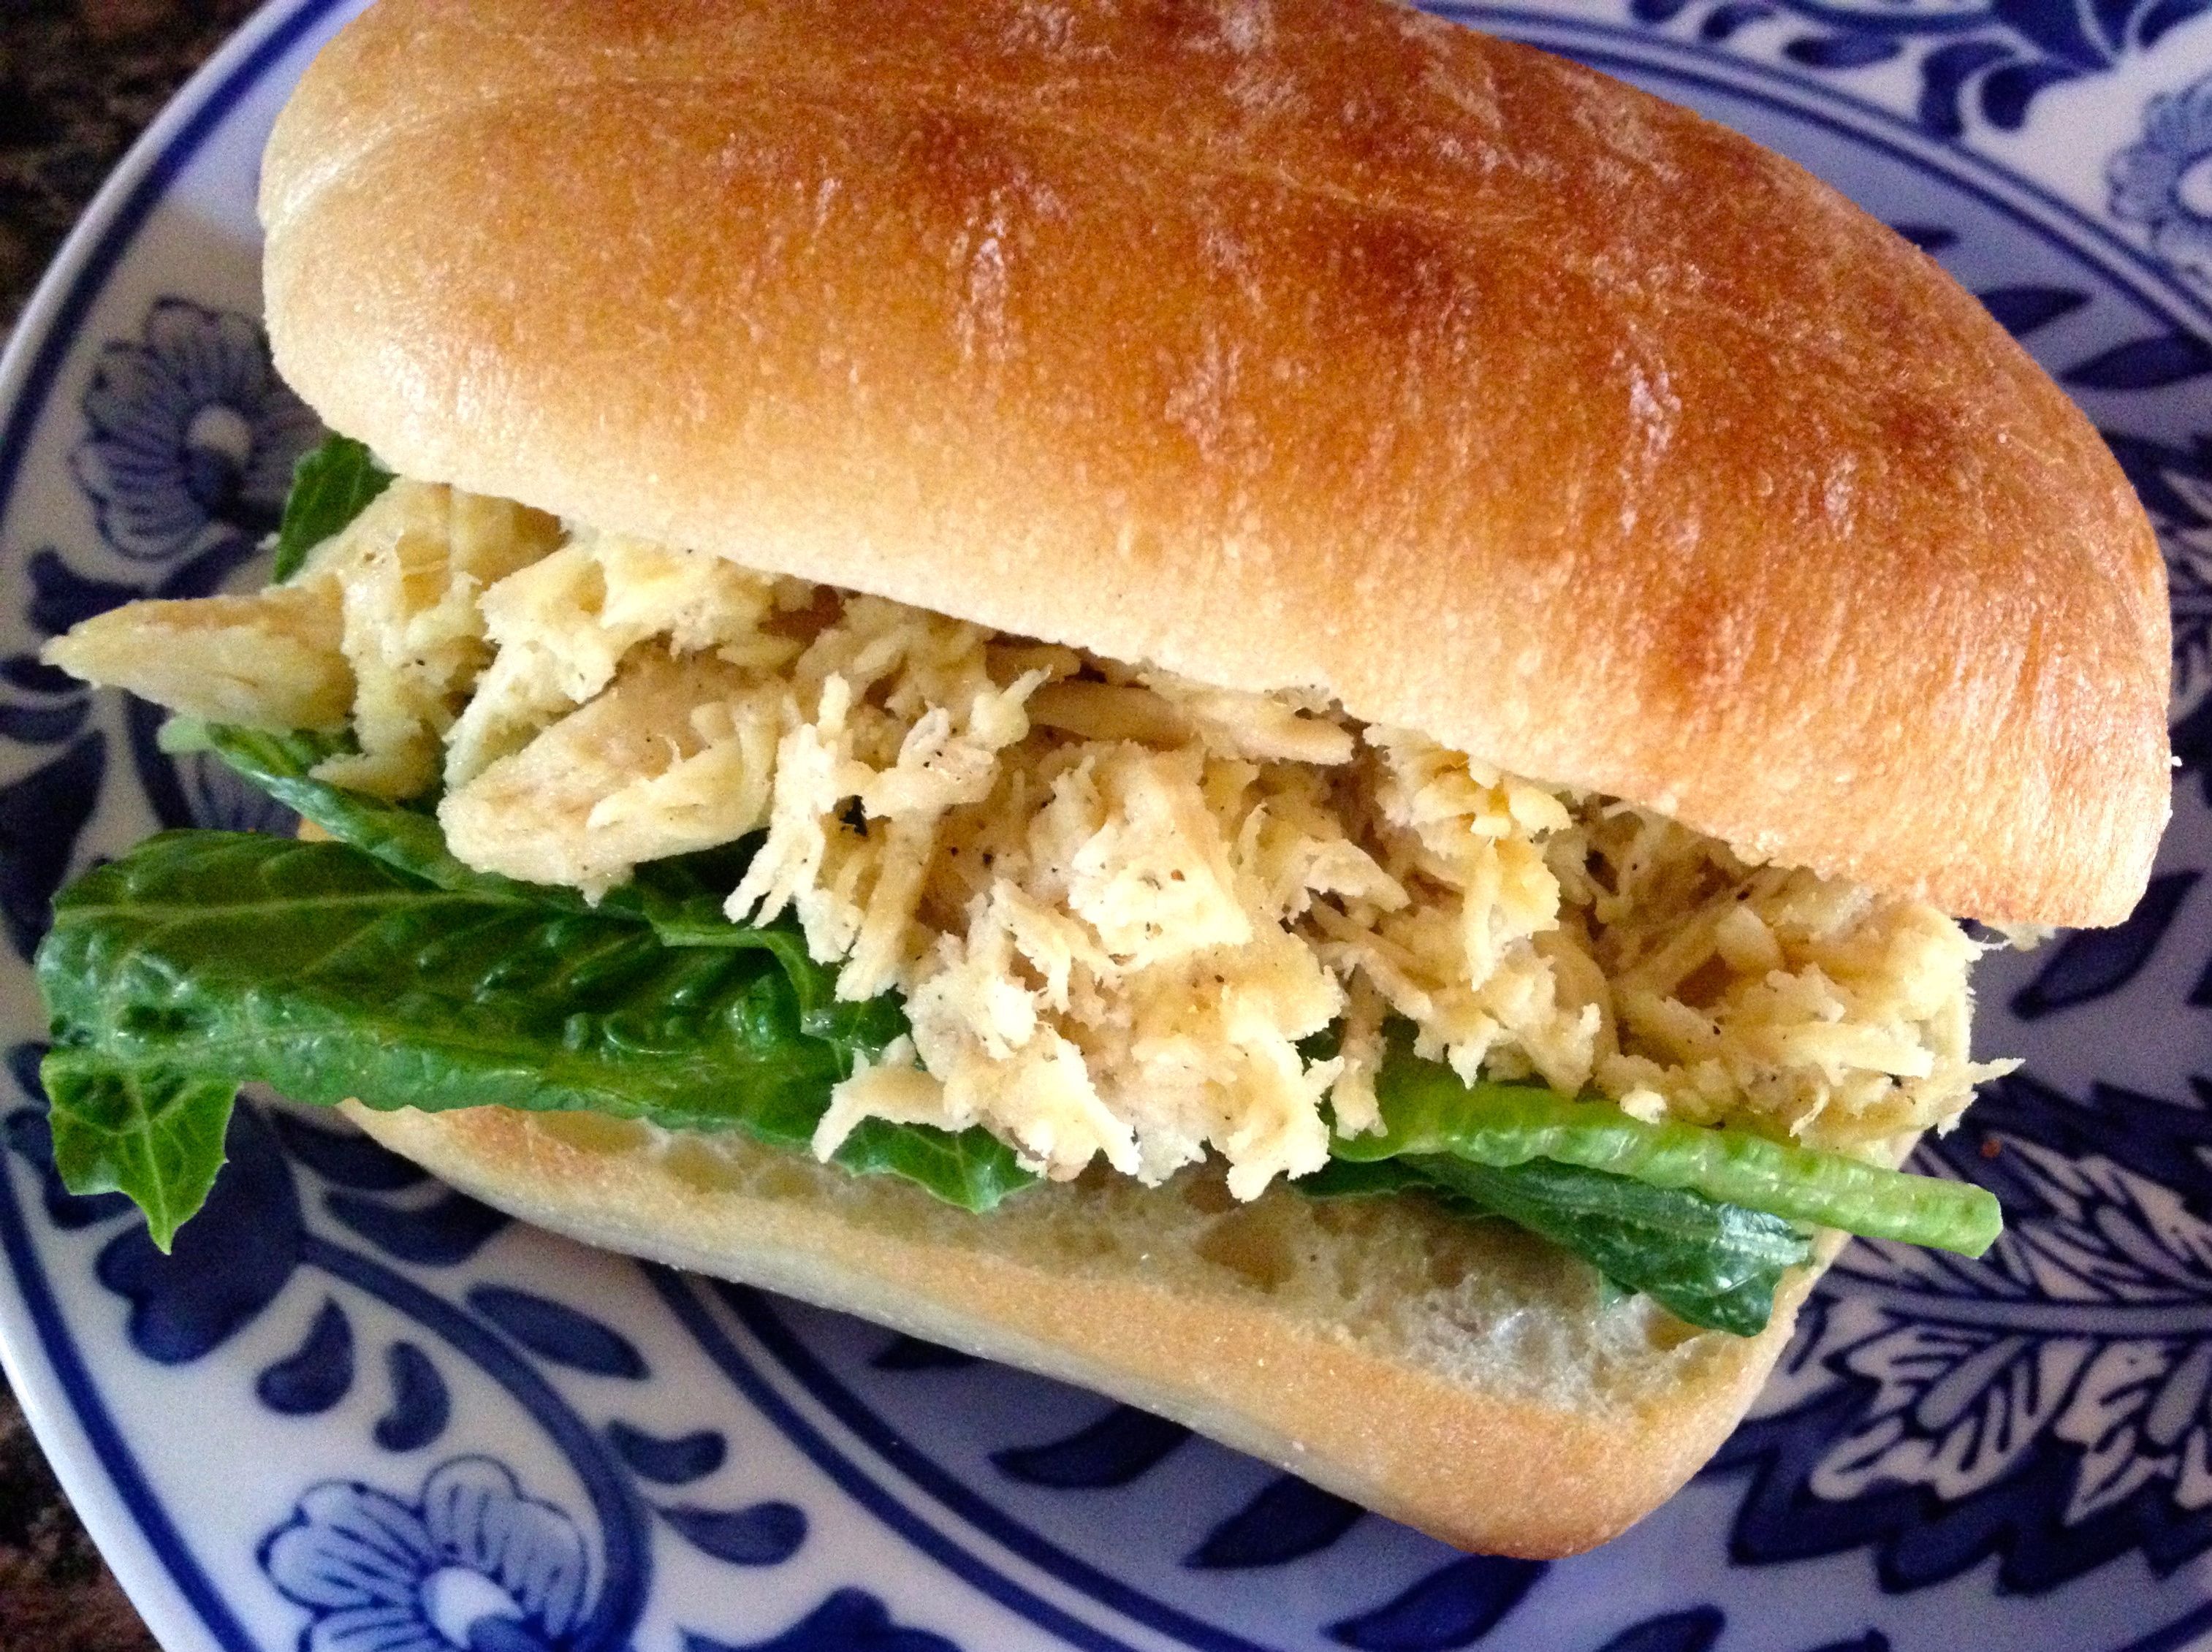 Crock Pot Chicken Caesar Sandwiches – My family has declared these THE BEST SAND